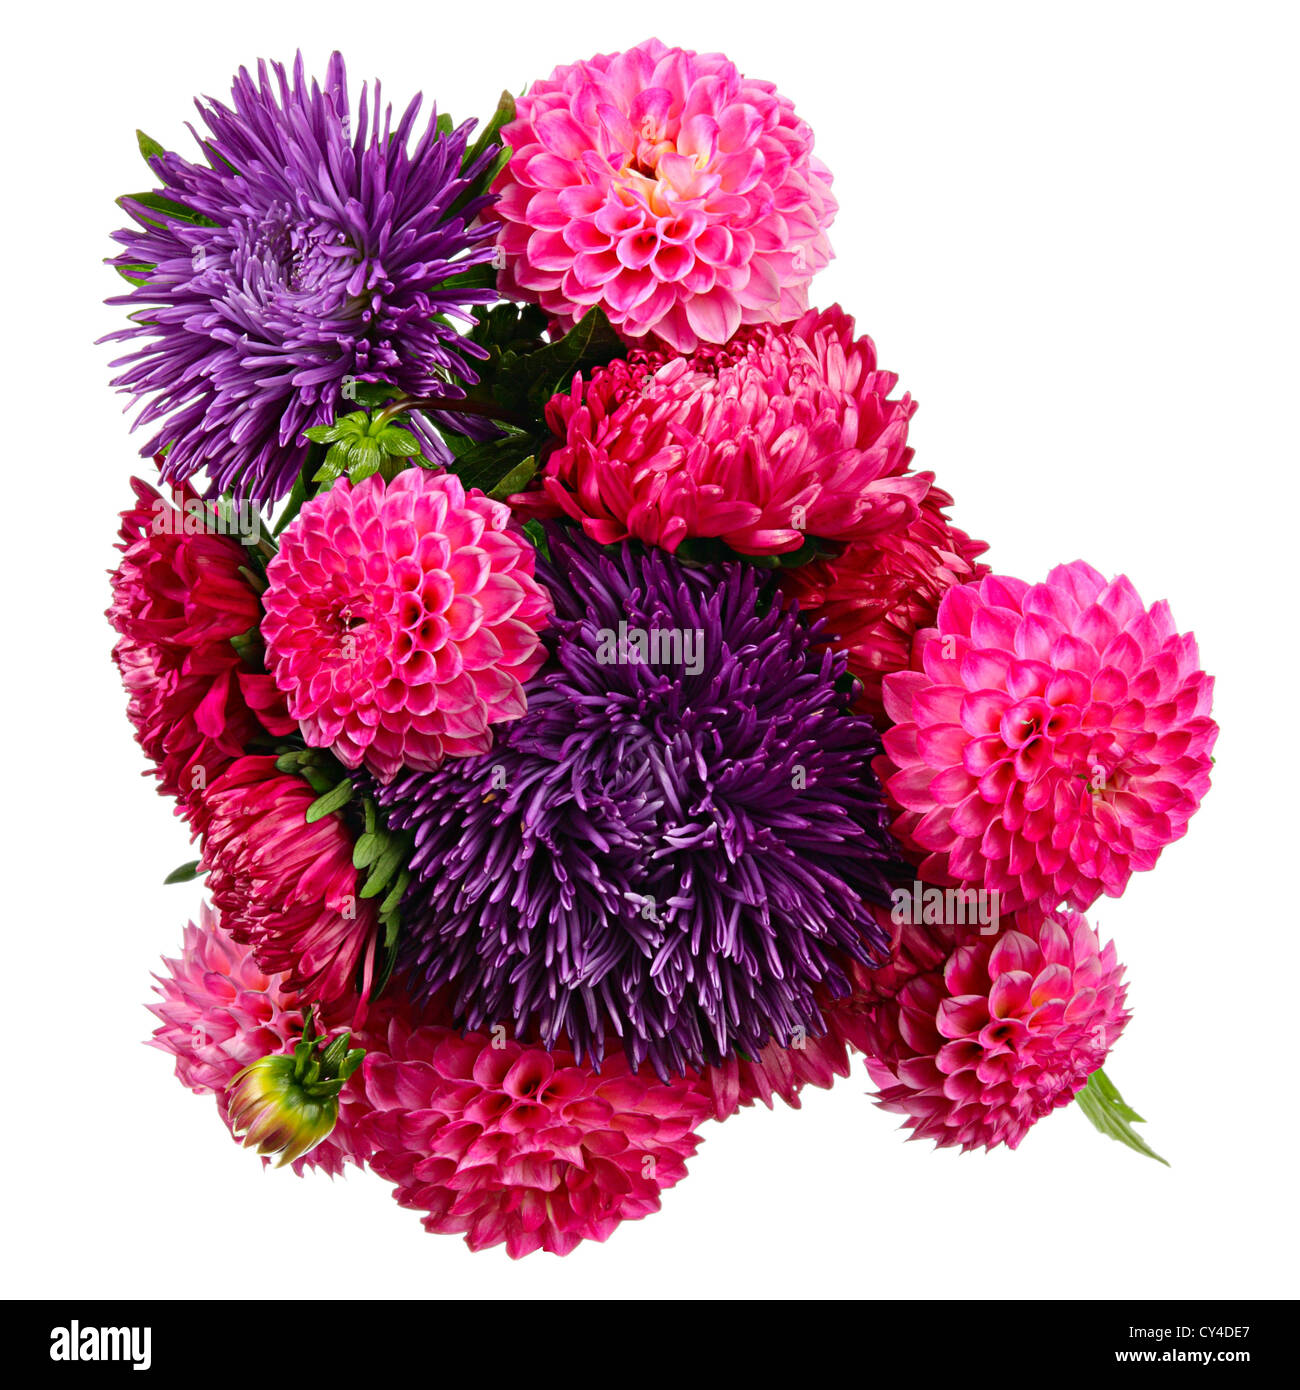 Bouquet of autumn flowers. Dahlias and asters isolated on white Stock Photo